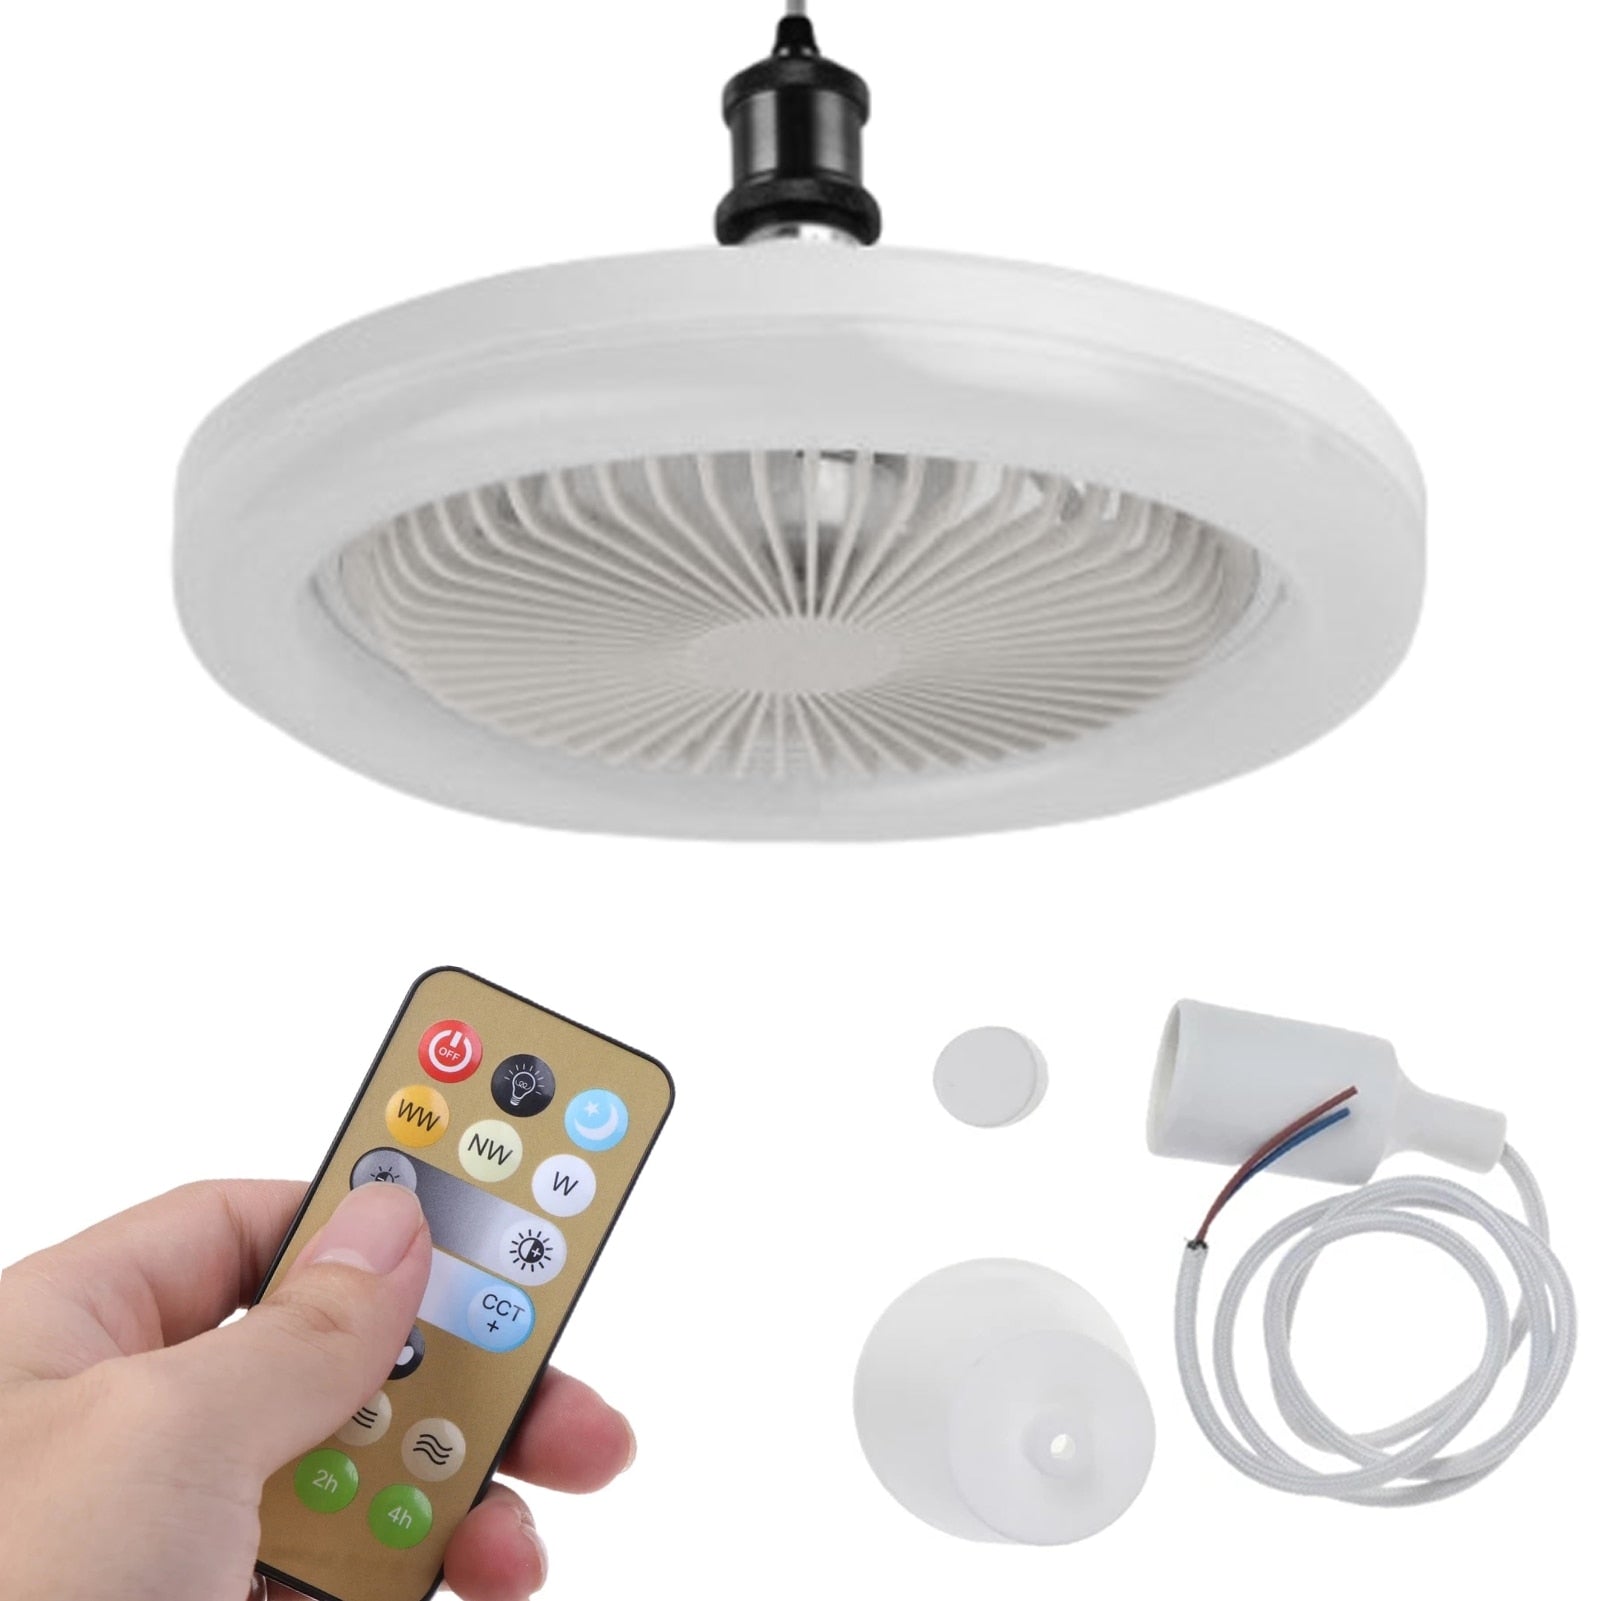 30W Ceiling Fan With Integrated Lights E27 Remote Ceiling Lighting Bedroom Living Room Switch Control Home Lamps AC85V-265V